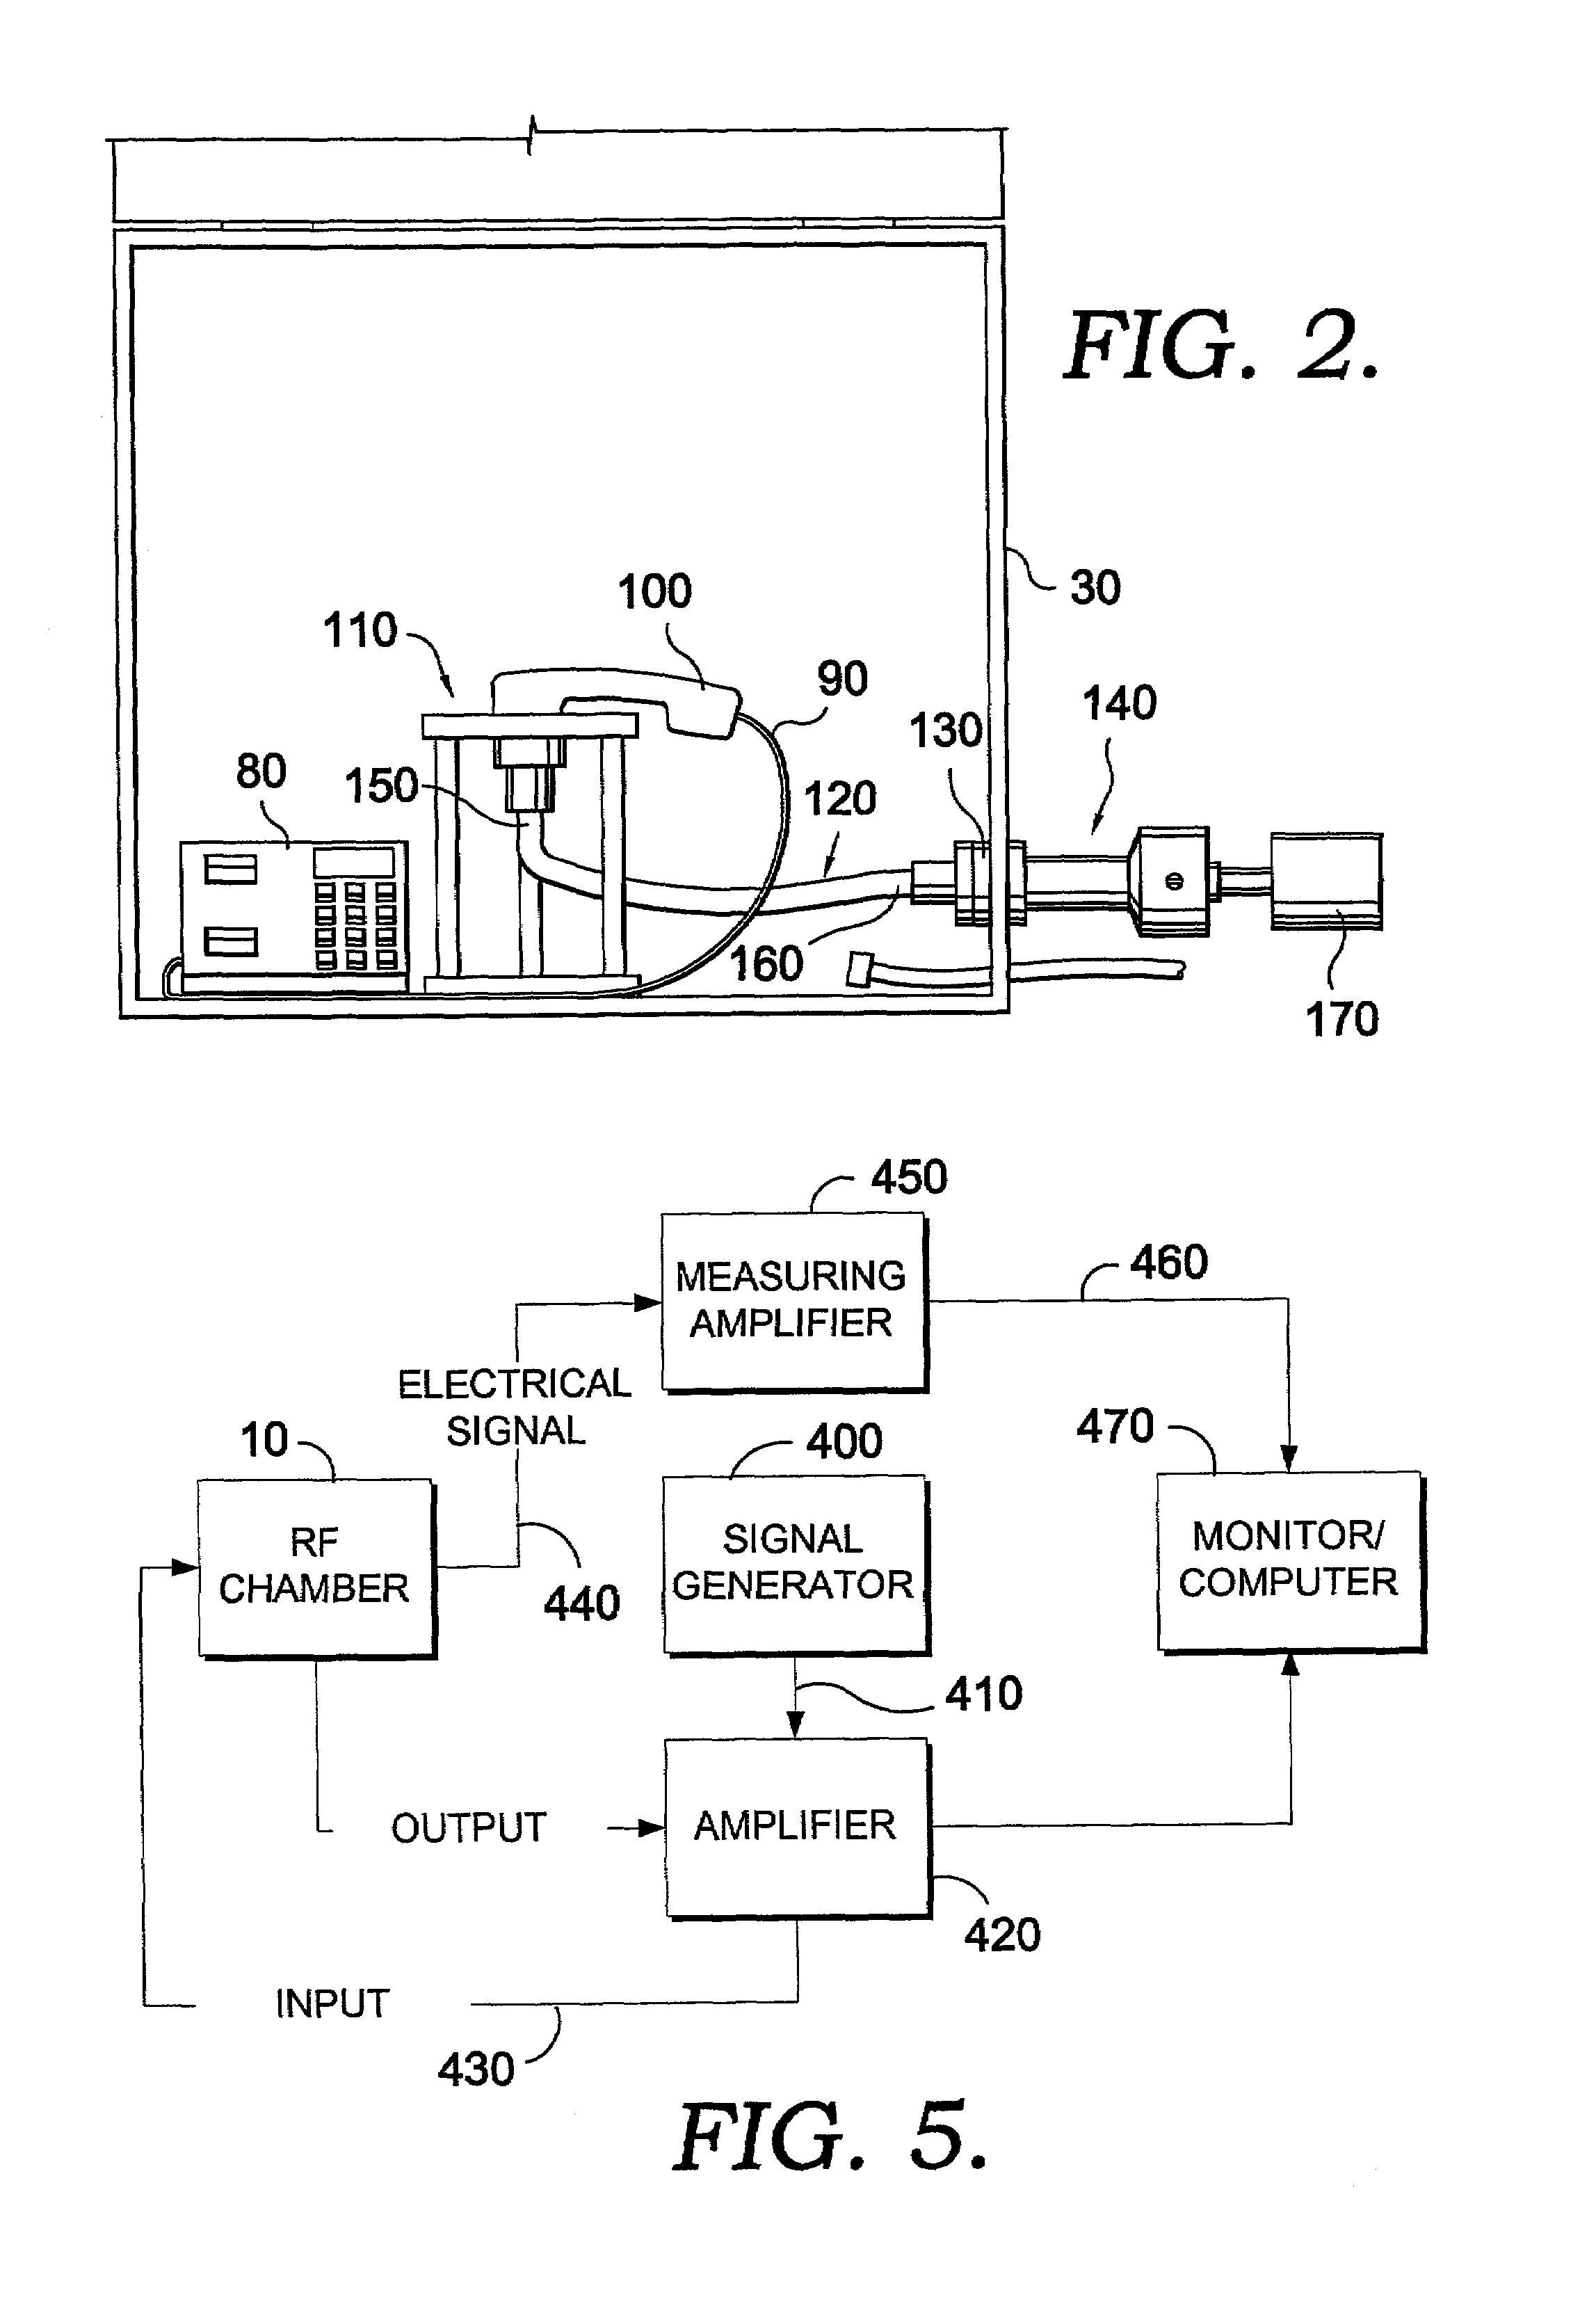 Acoustic signal transfer device